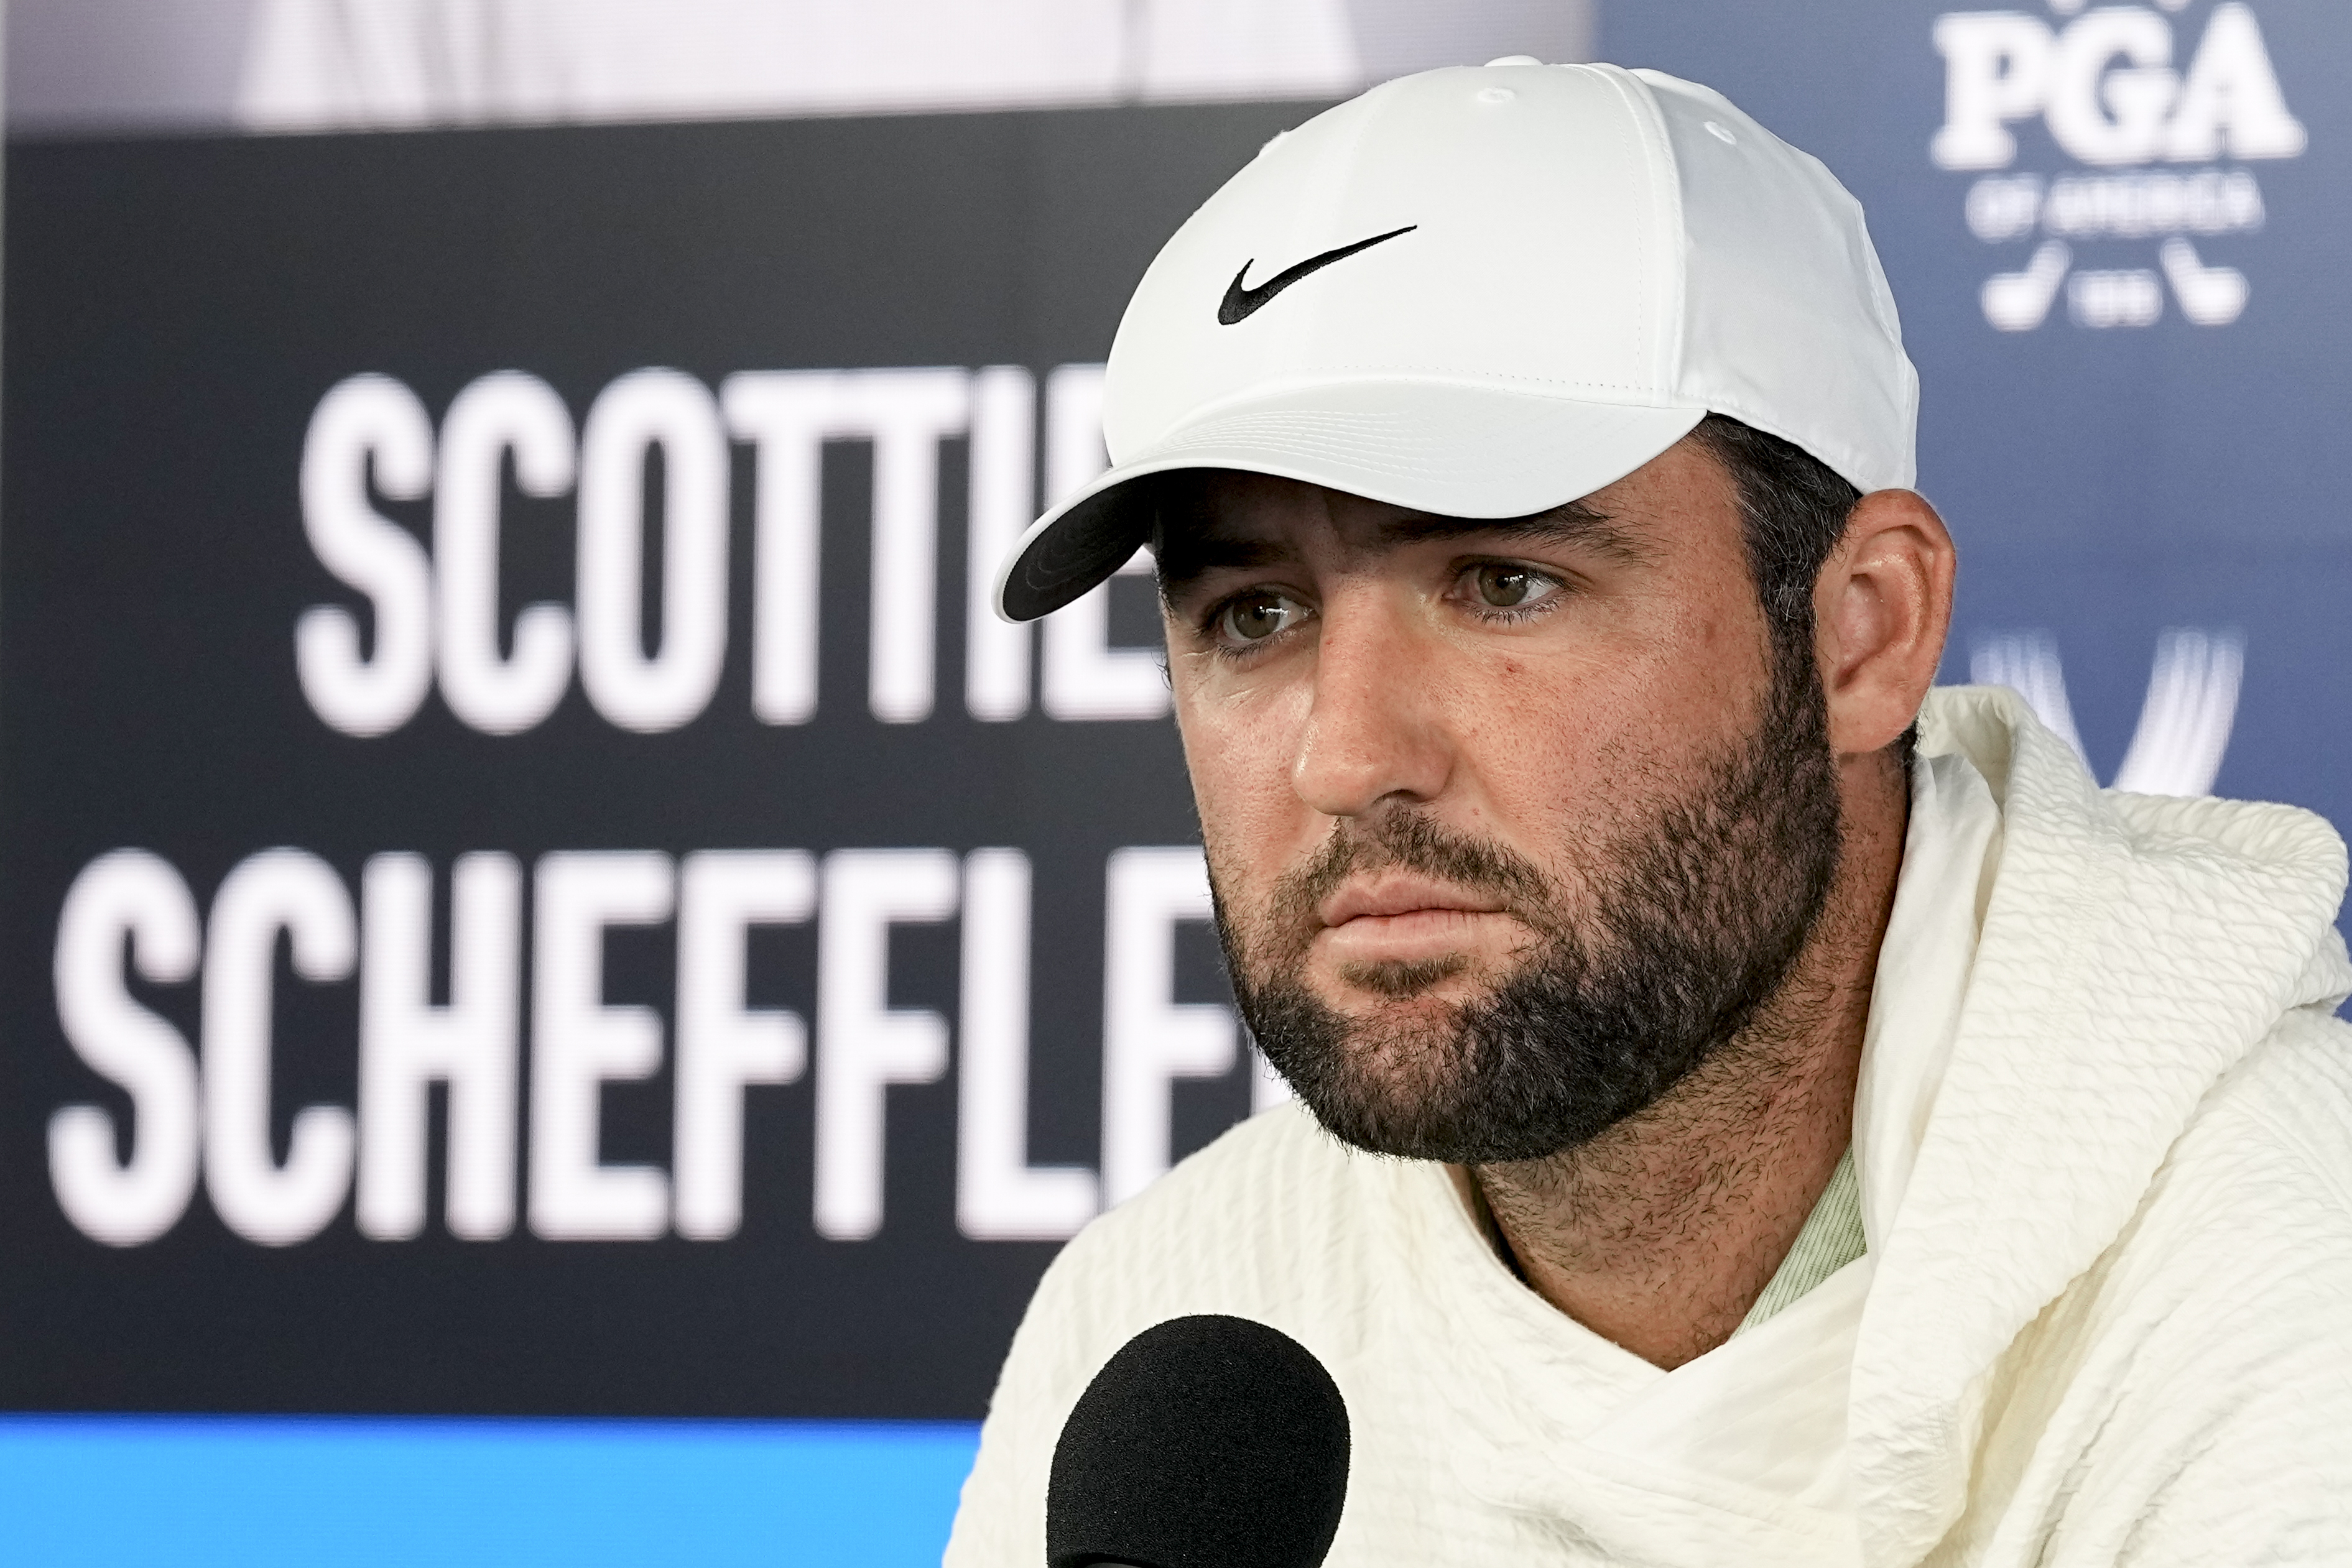 Scottie Scheffler, from the course to jail and back: What to know
about his PGA Championship arrest